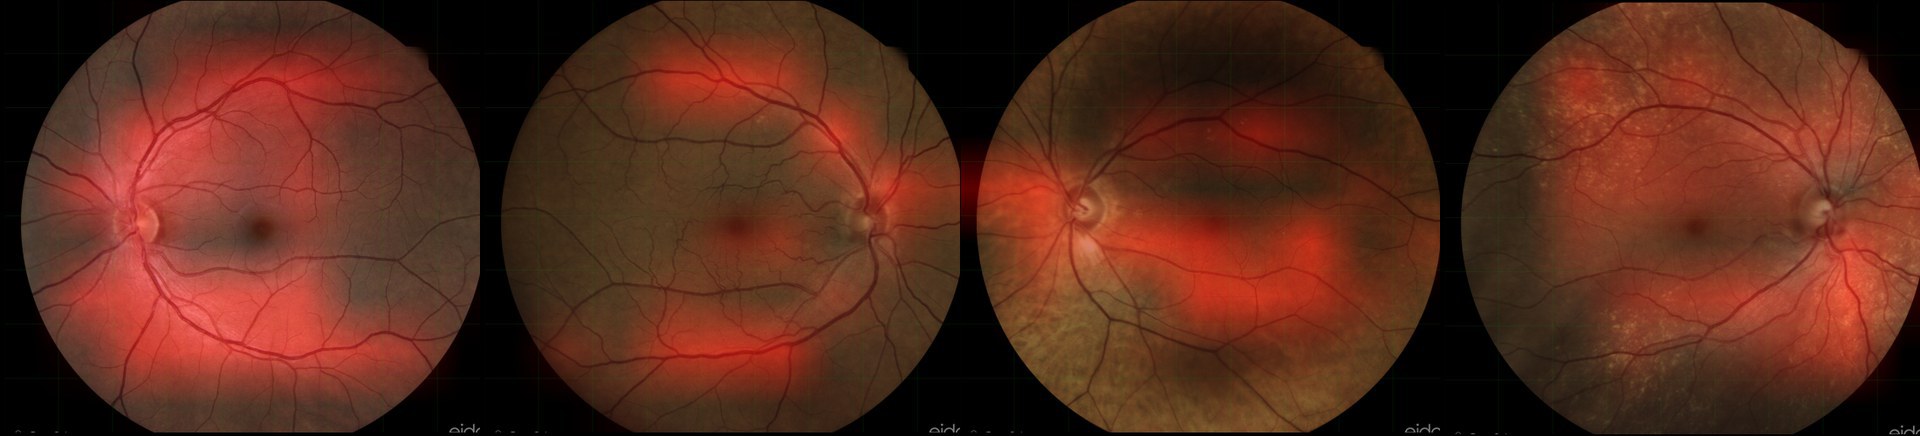 The algorithm pays particular attention - to the large retinal vessels when detecting peripheral arterial disease. This is shown by the bright red areas in the image, which were particularly important for the classification.